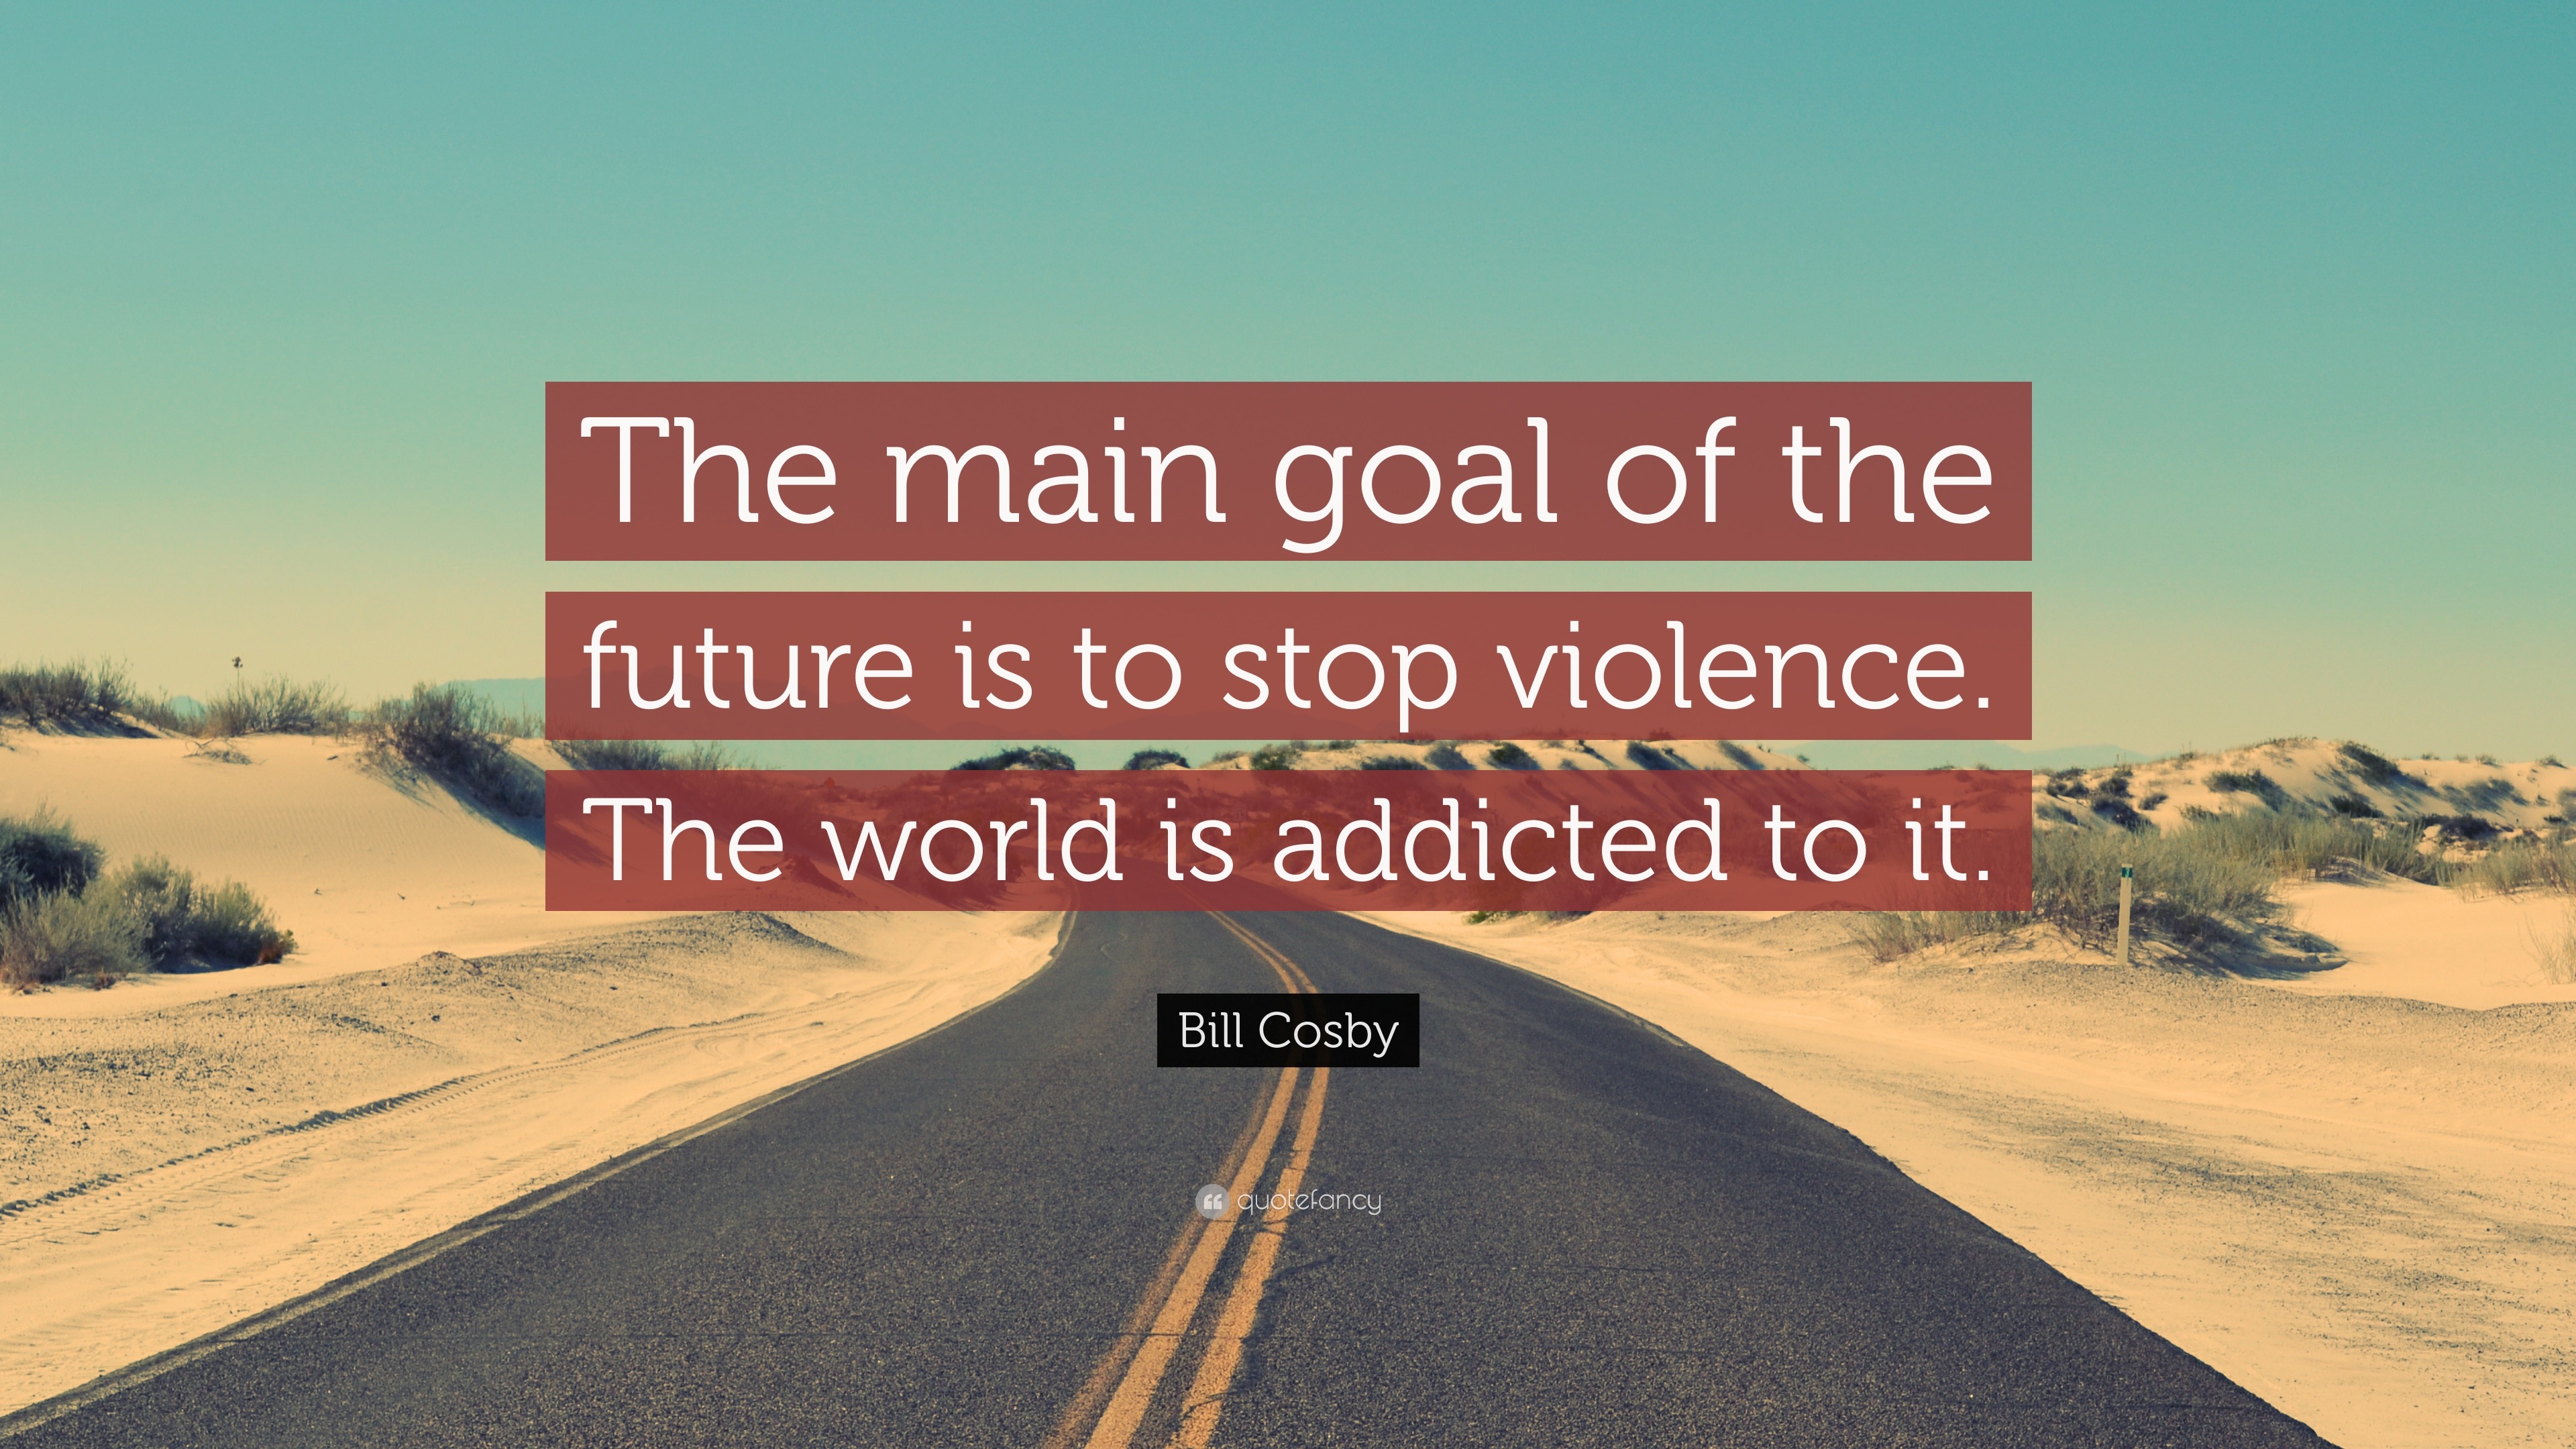 The main goal of the future is to stop violence quote